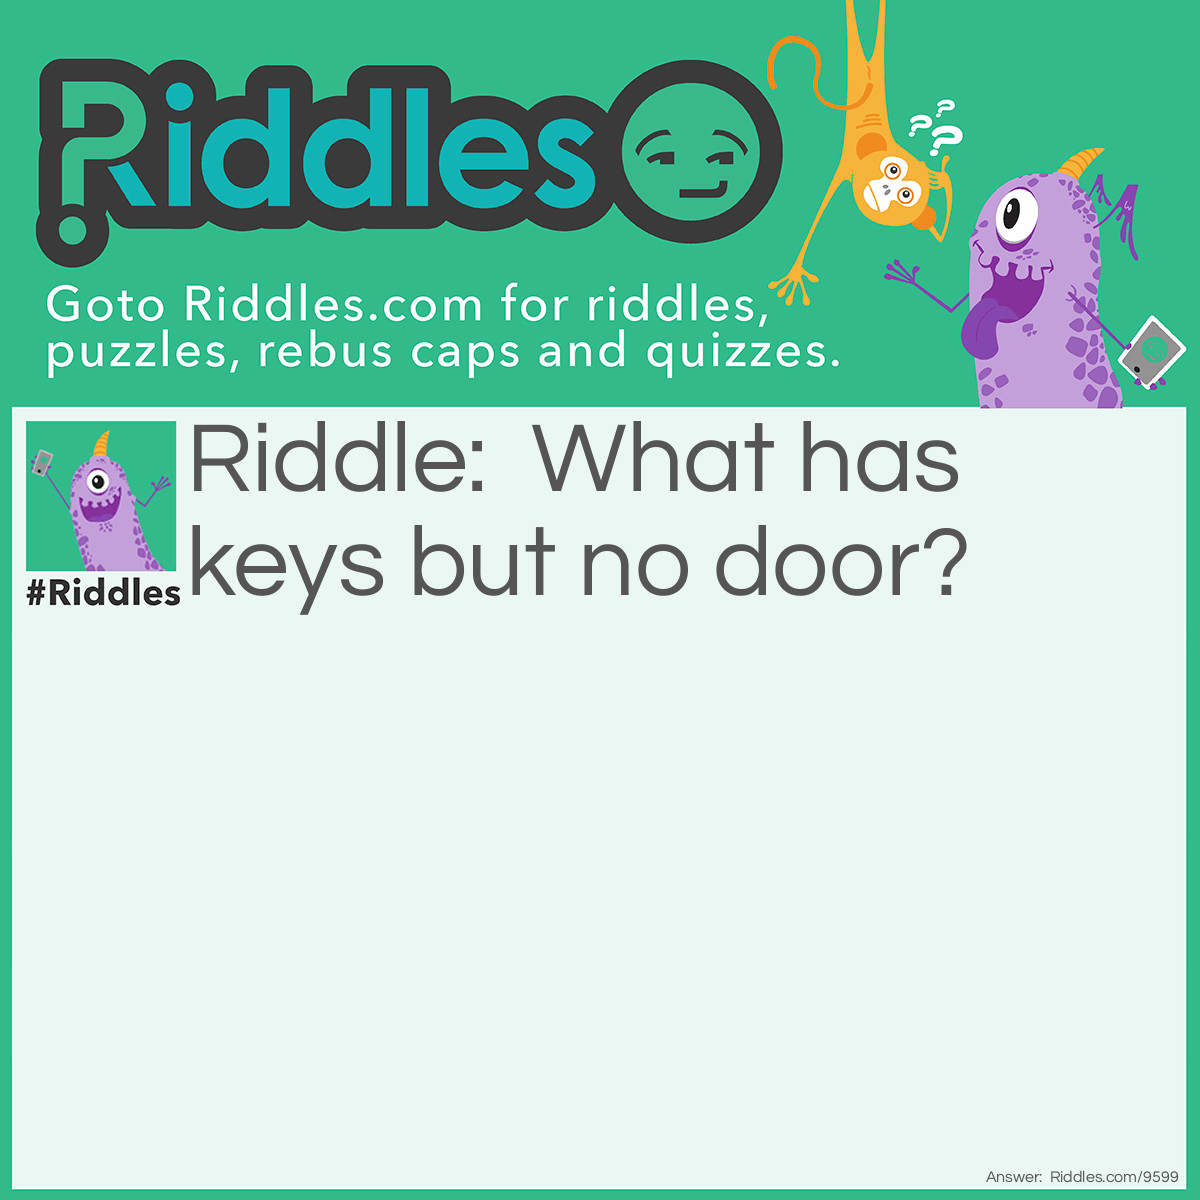 Riddle: What has keys but no door? Answer: A piano.